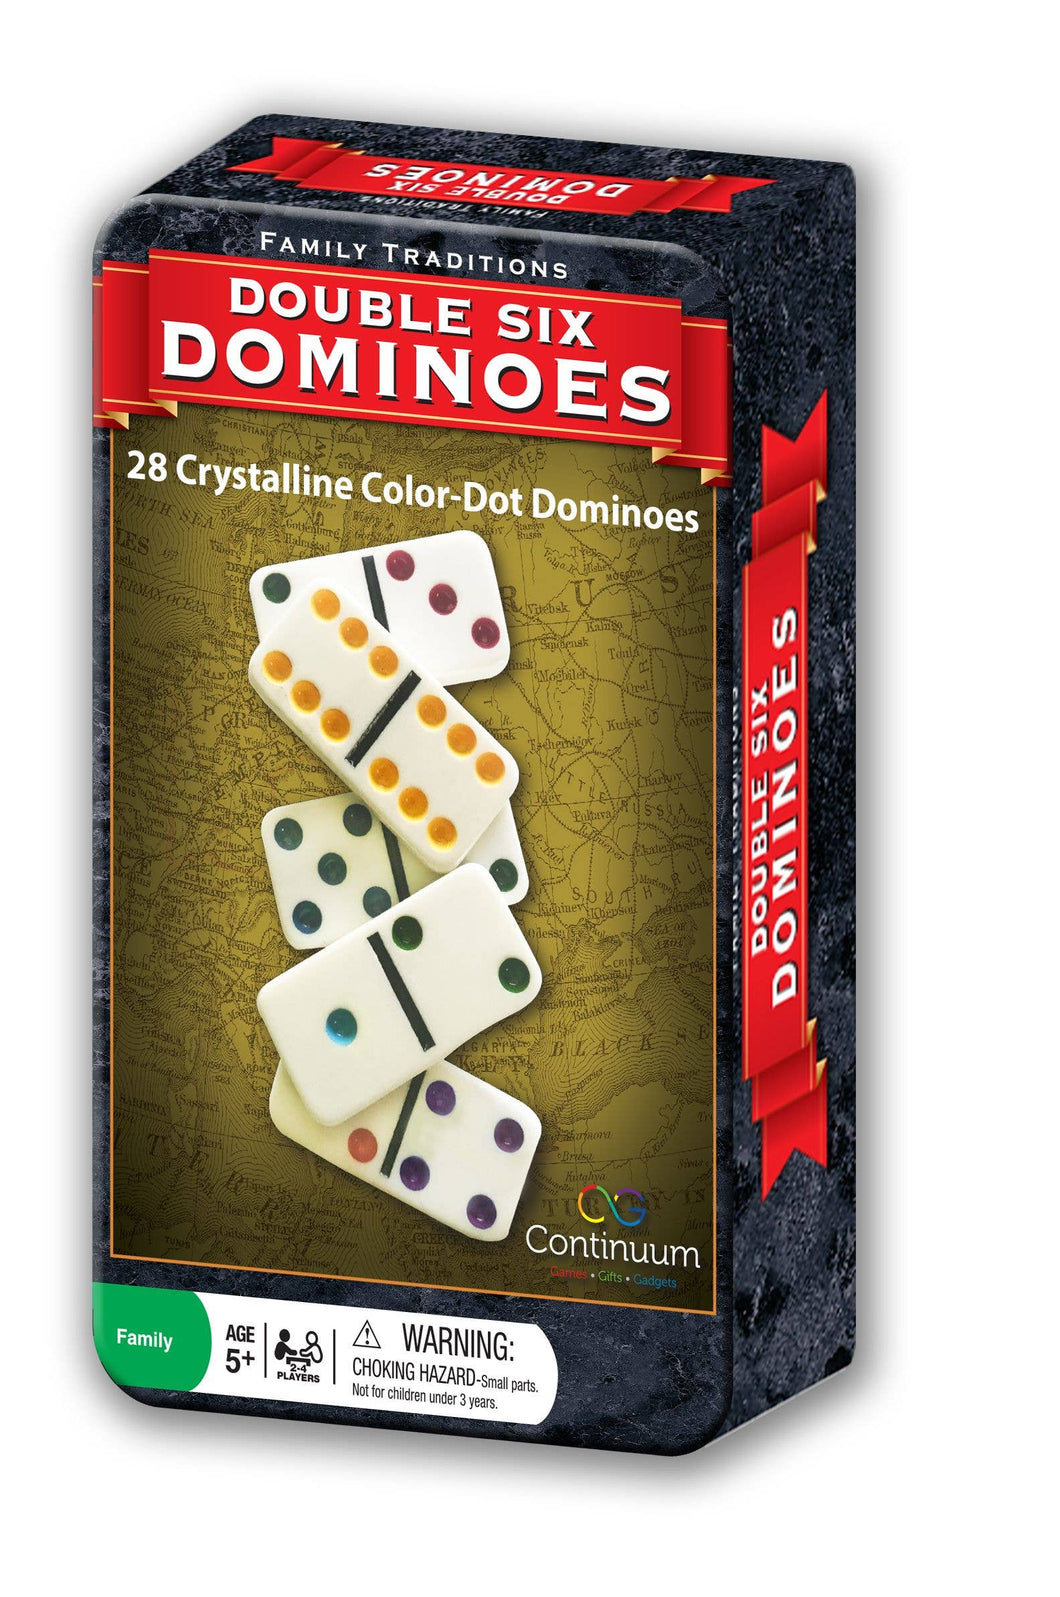 Family Traditions Double 6 Dominoes Tin